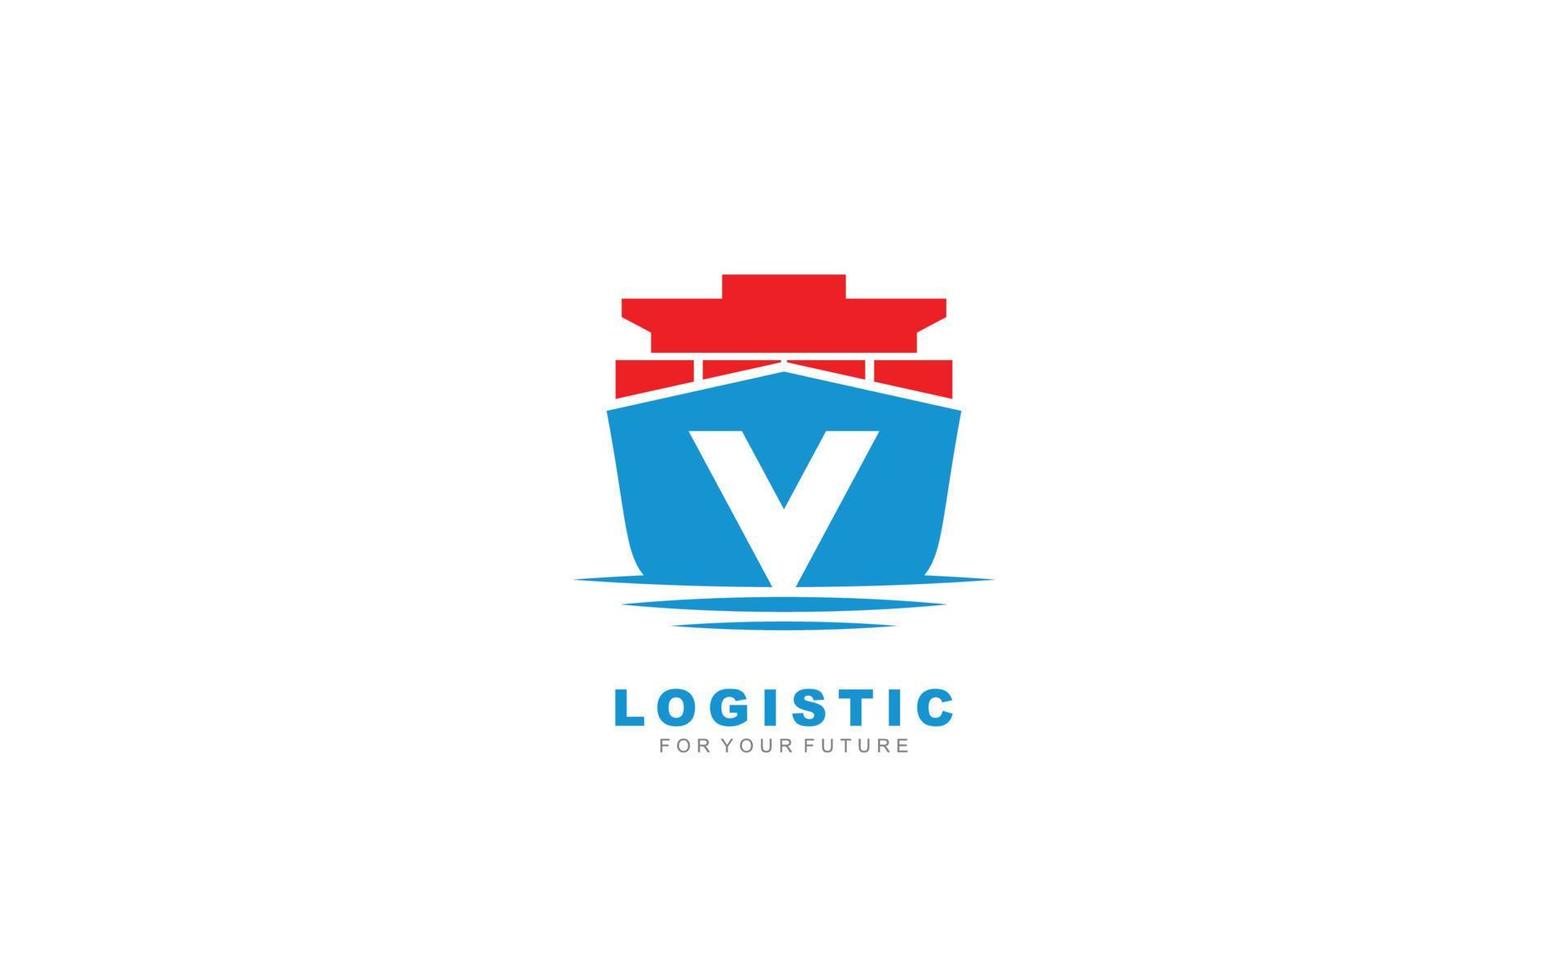 V logo logistic for branding company. shipping template vector illustration for your brand.